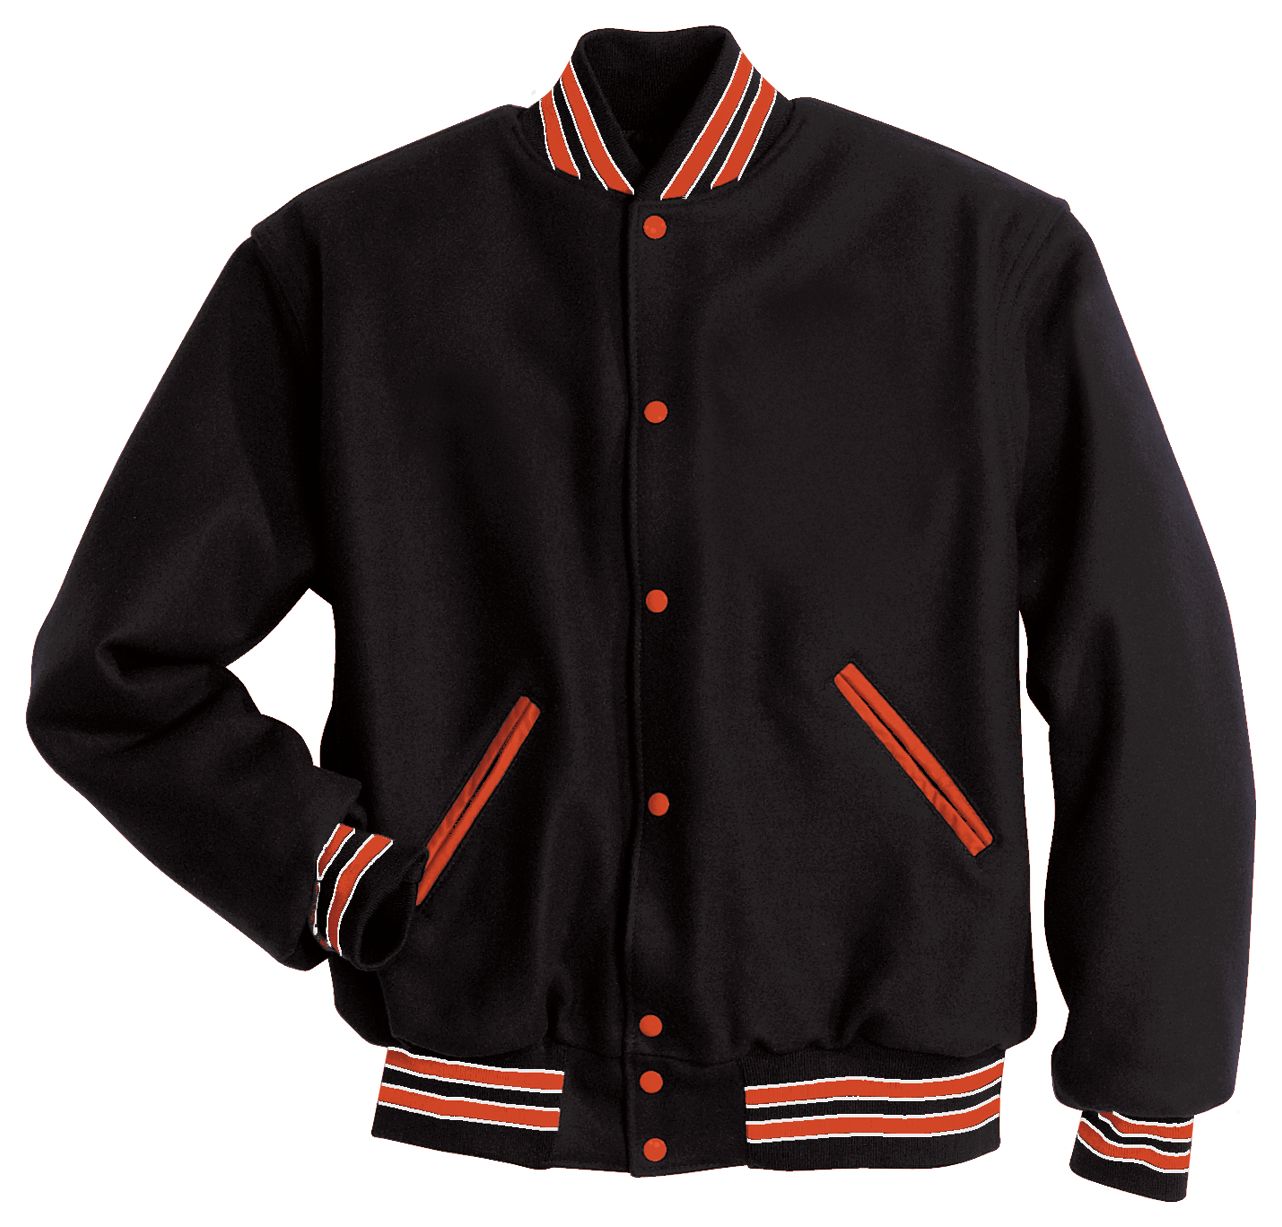 Holloway Letterman Jacket in Black/Burnt Orange/White  -Part of the Adult, Adult-Jacket, Holloway, Outerwear product lines at KanaleyCreations.com